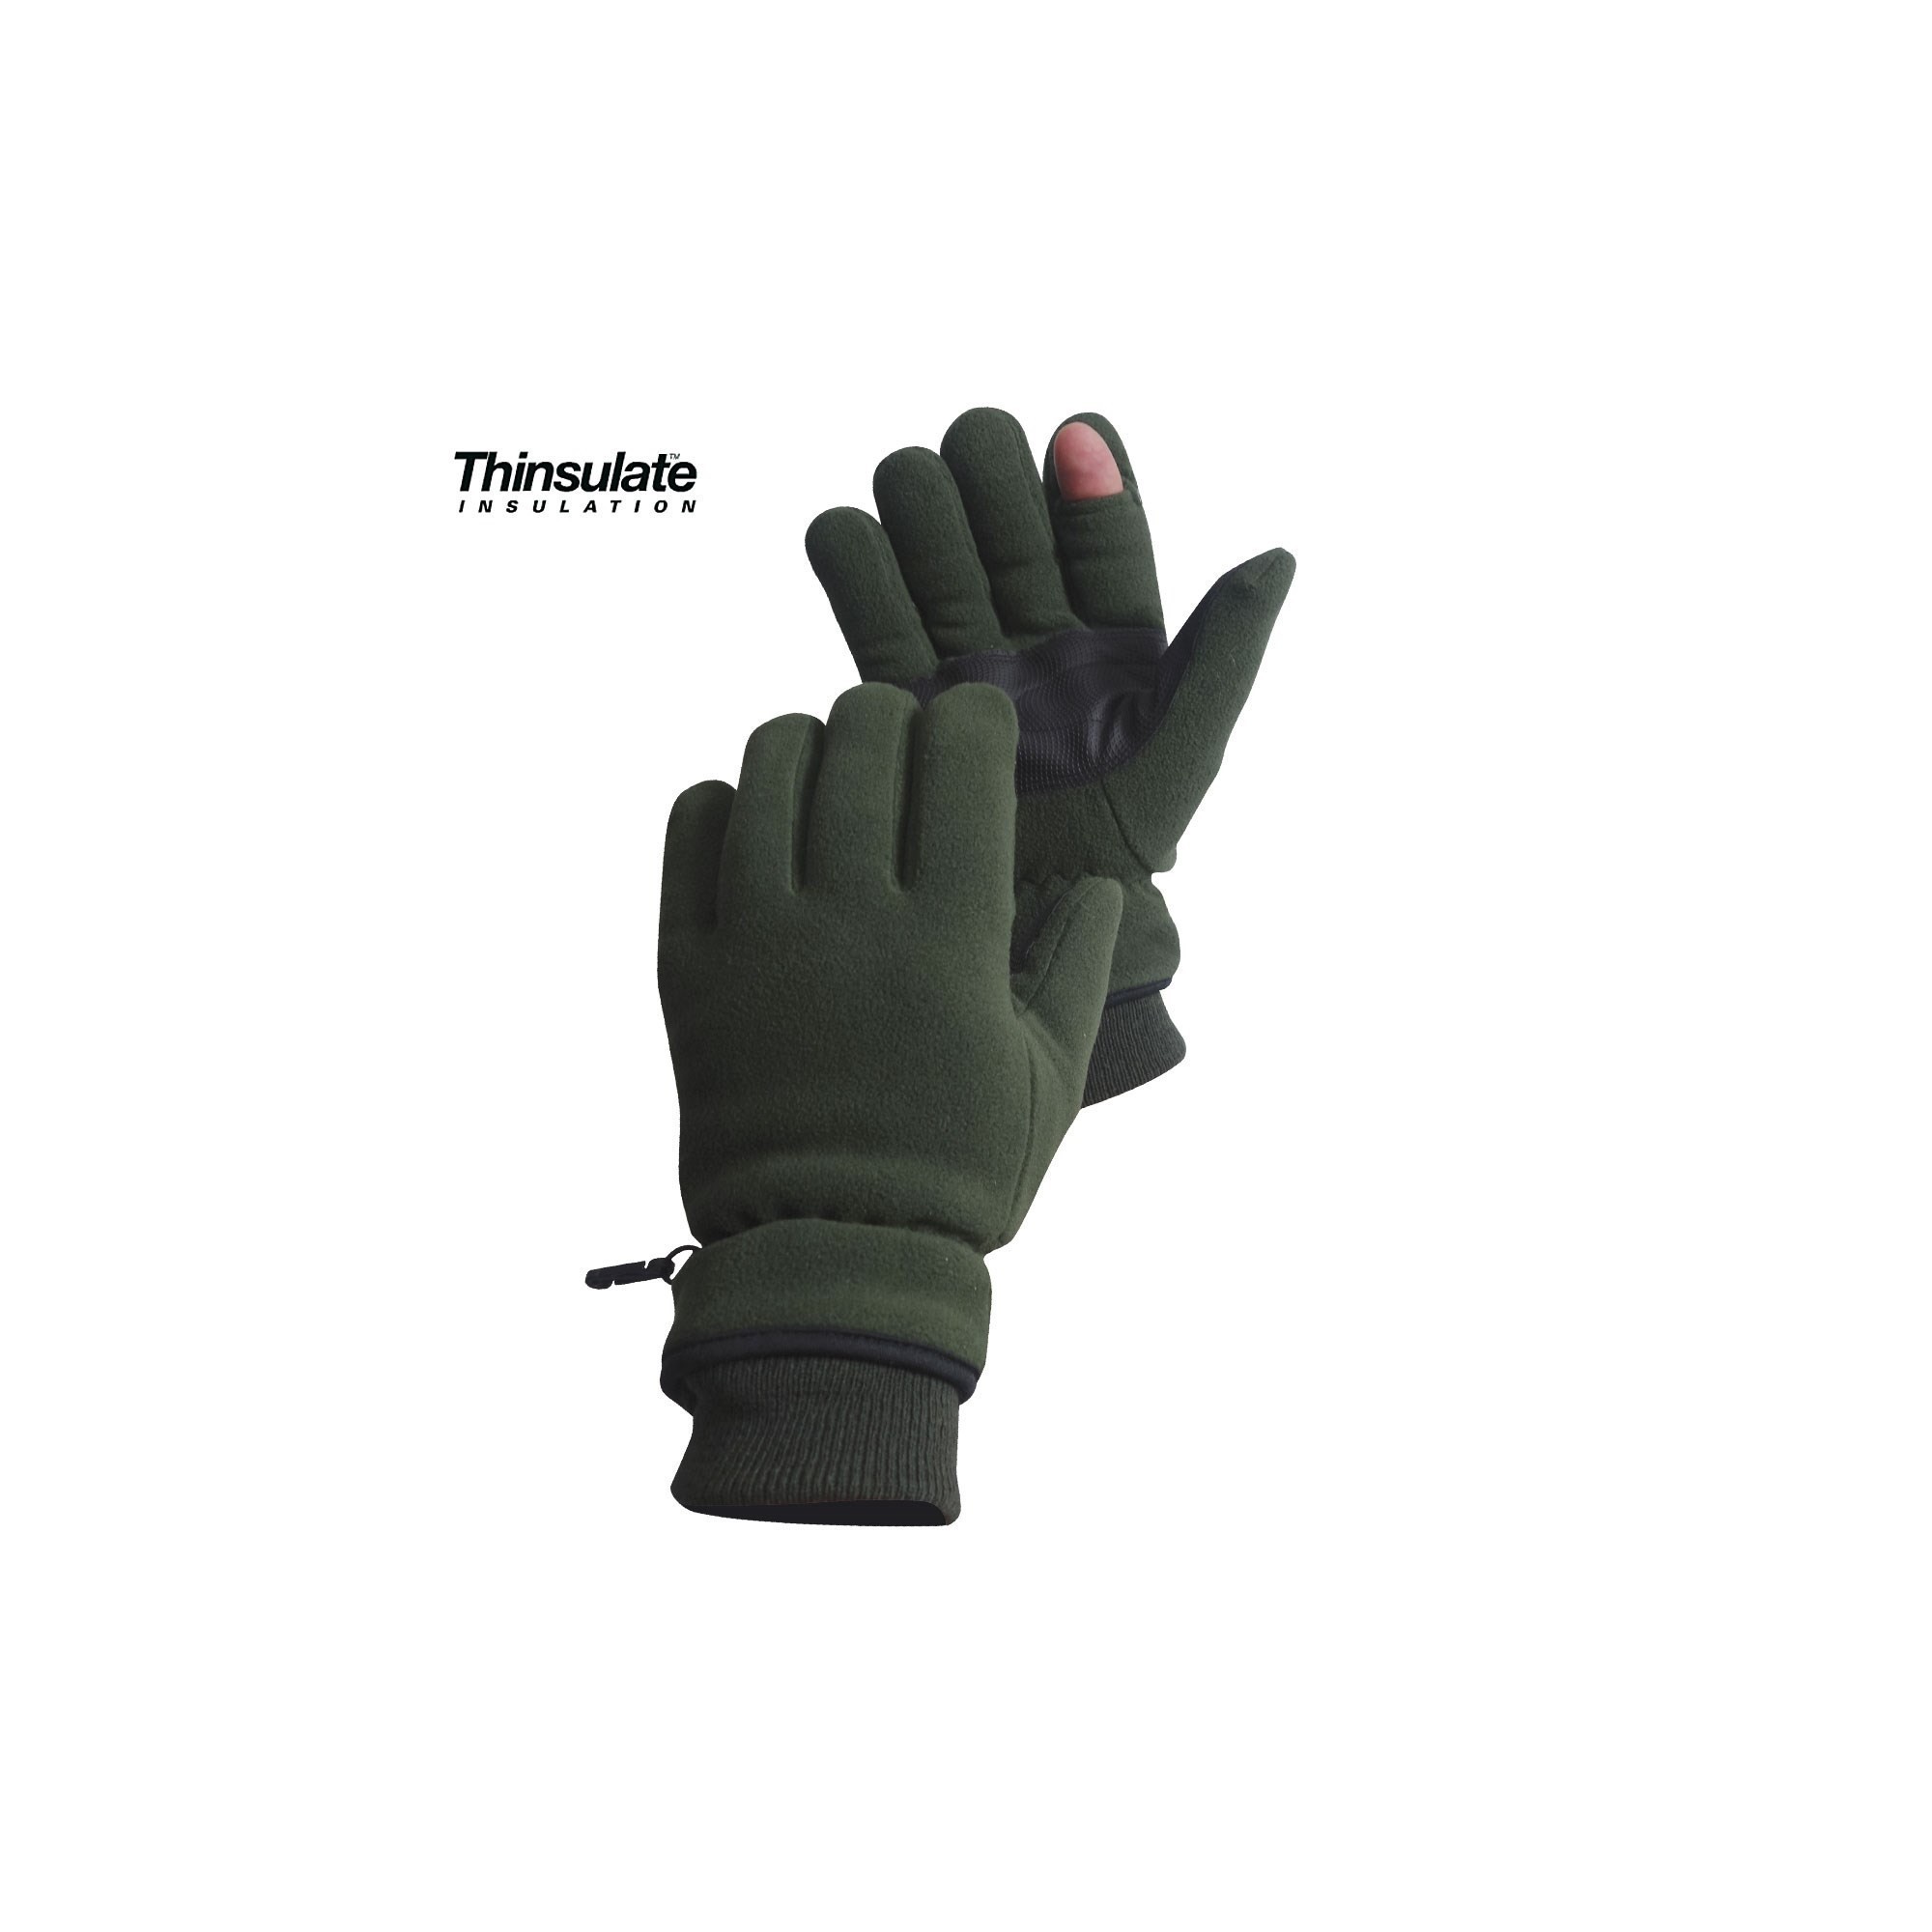 GANTS  POLAIRES  DOIGT TIREUR THINSULATE VERT ARMEE